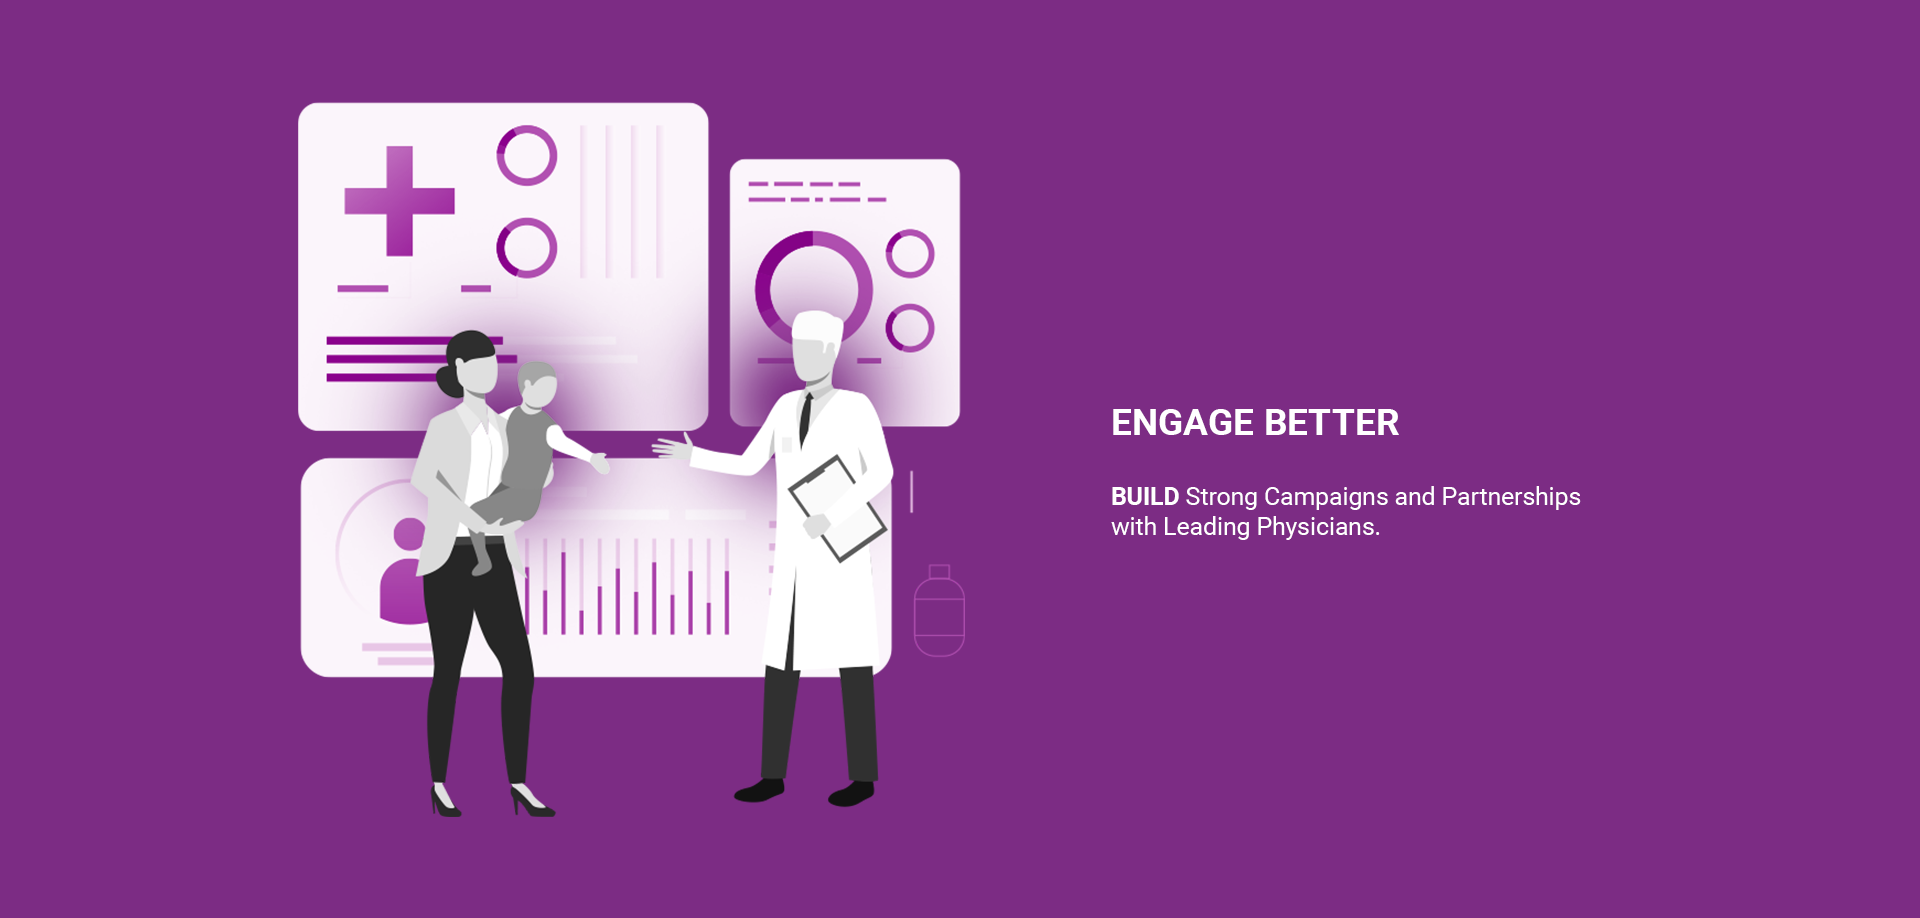 Illustration of a doctor and a patient with her child discussing patient data and charts on a display board, highlighting the text "Engage Better".